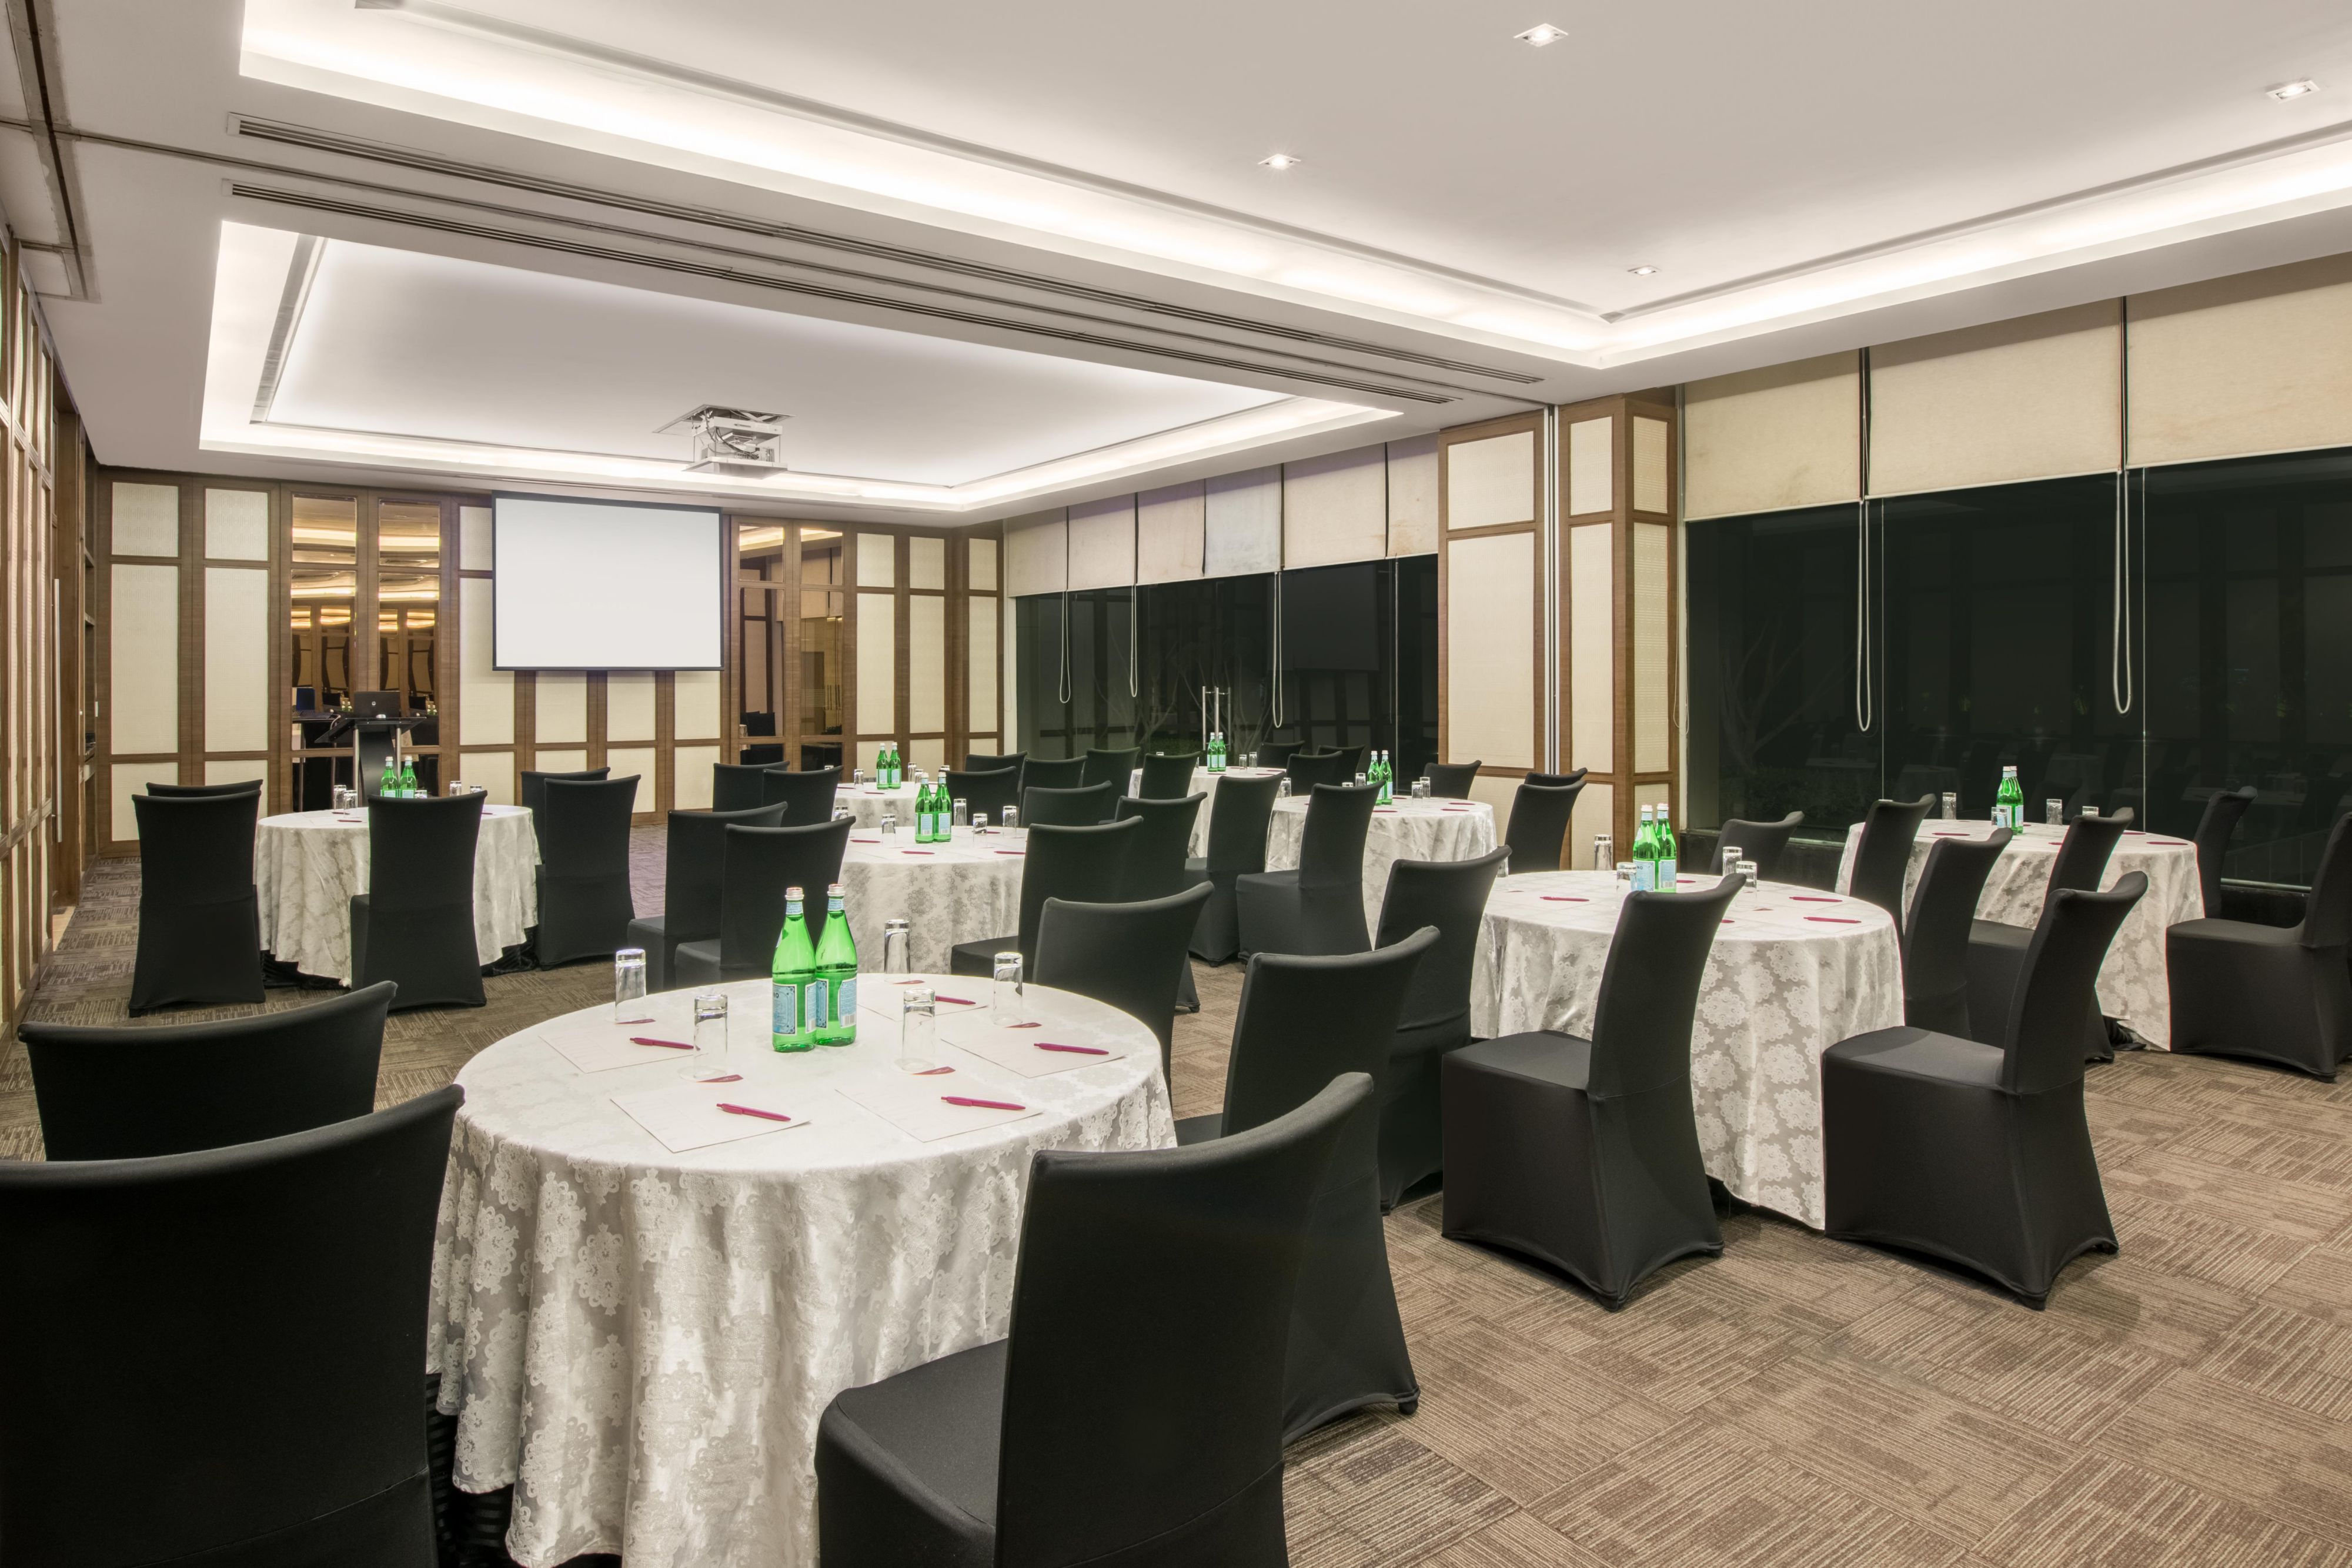 Pearl ballroom is best suited for small &amp; medium size meetings